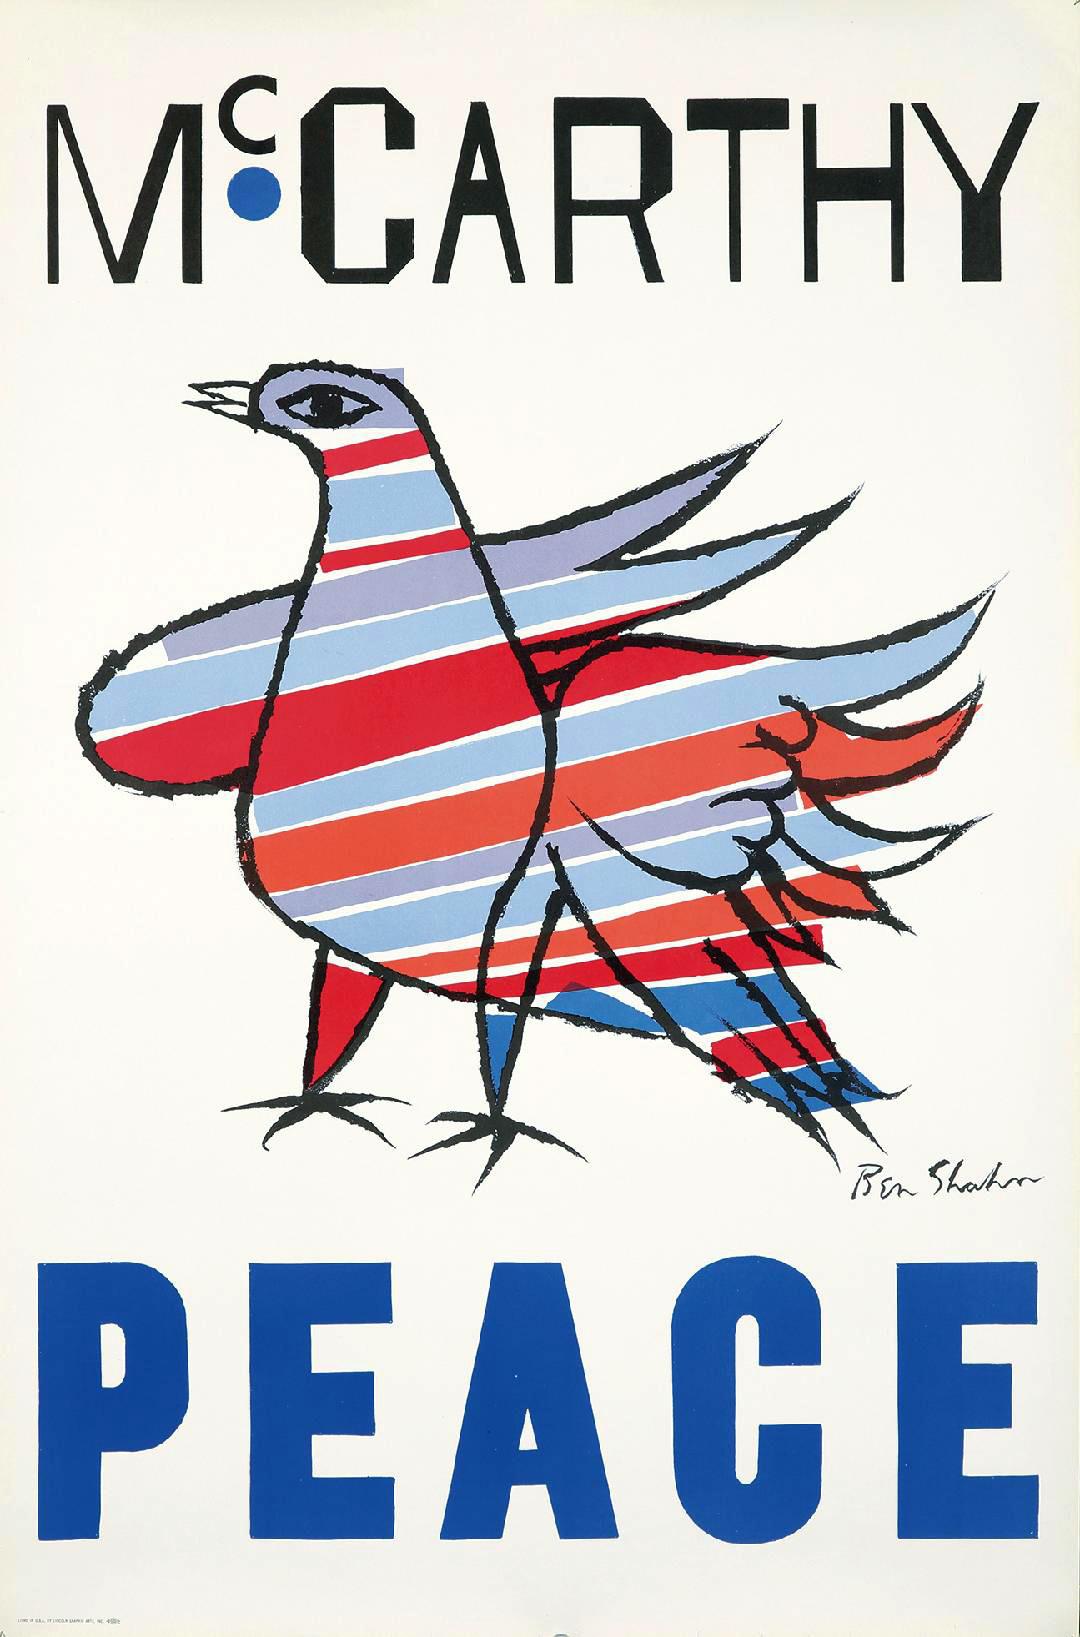 Ben Shahn McCarthy Peace poster, 1968.
When Eugene McCarthy ran for U.S. president in 1968 against incumbent Lyndon Johnson, his candidacy was based on his opposition to the war in Vietnam that was obliterating American troops, resources and unity.